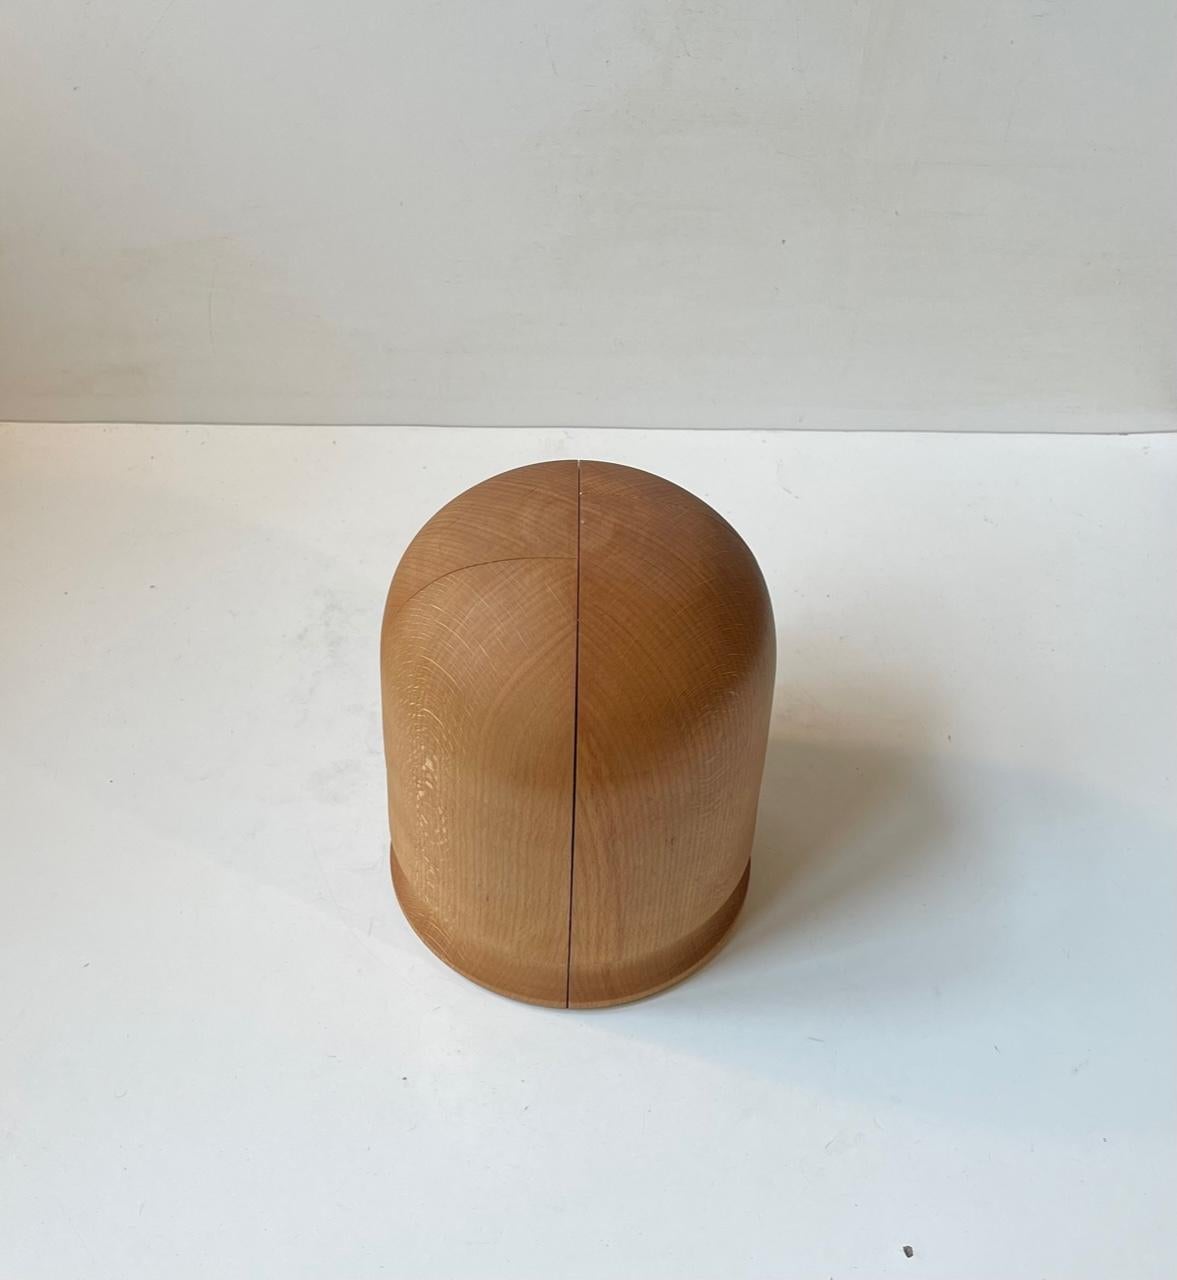 A plain professionally made hat head fashioned from 4 solid lumps of pine. It has a center-screw and is adjustable to the sides expanding the circumference. Custom-made by unknown HVF. Measurements: H: 19 cm, Diameter: 16 cm (fully screwed together).